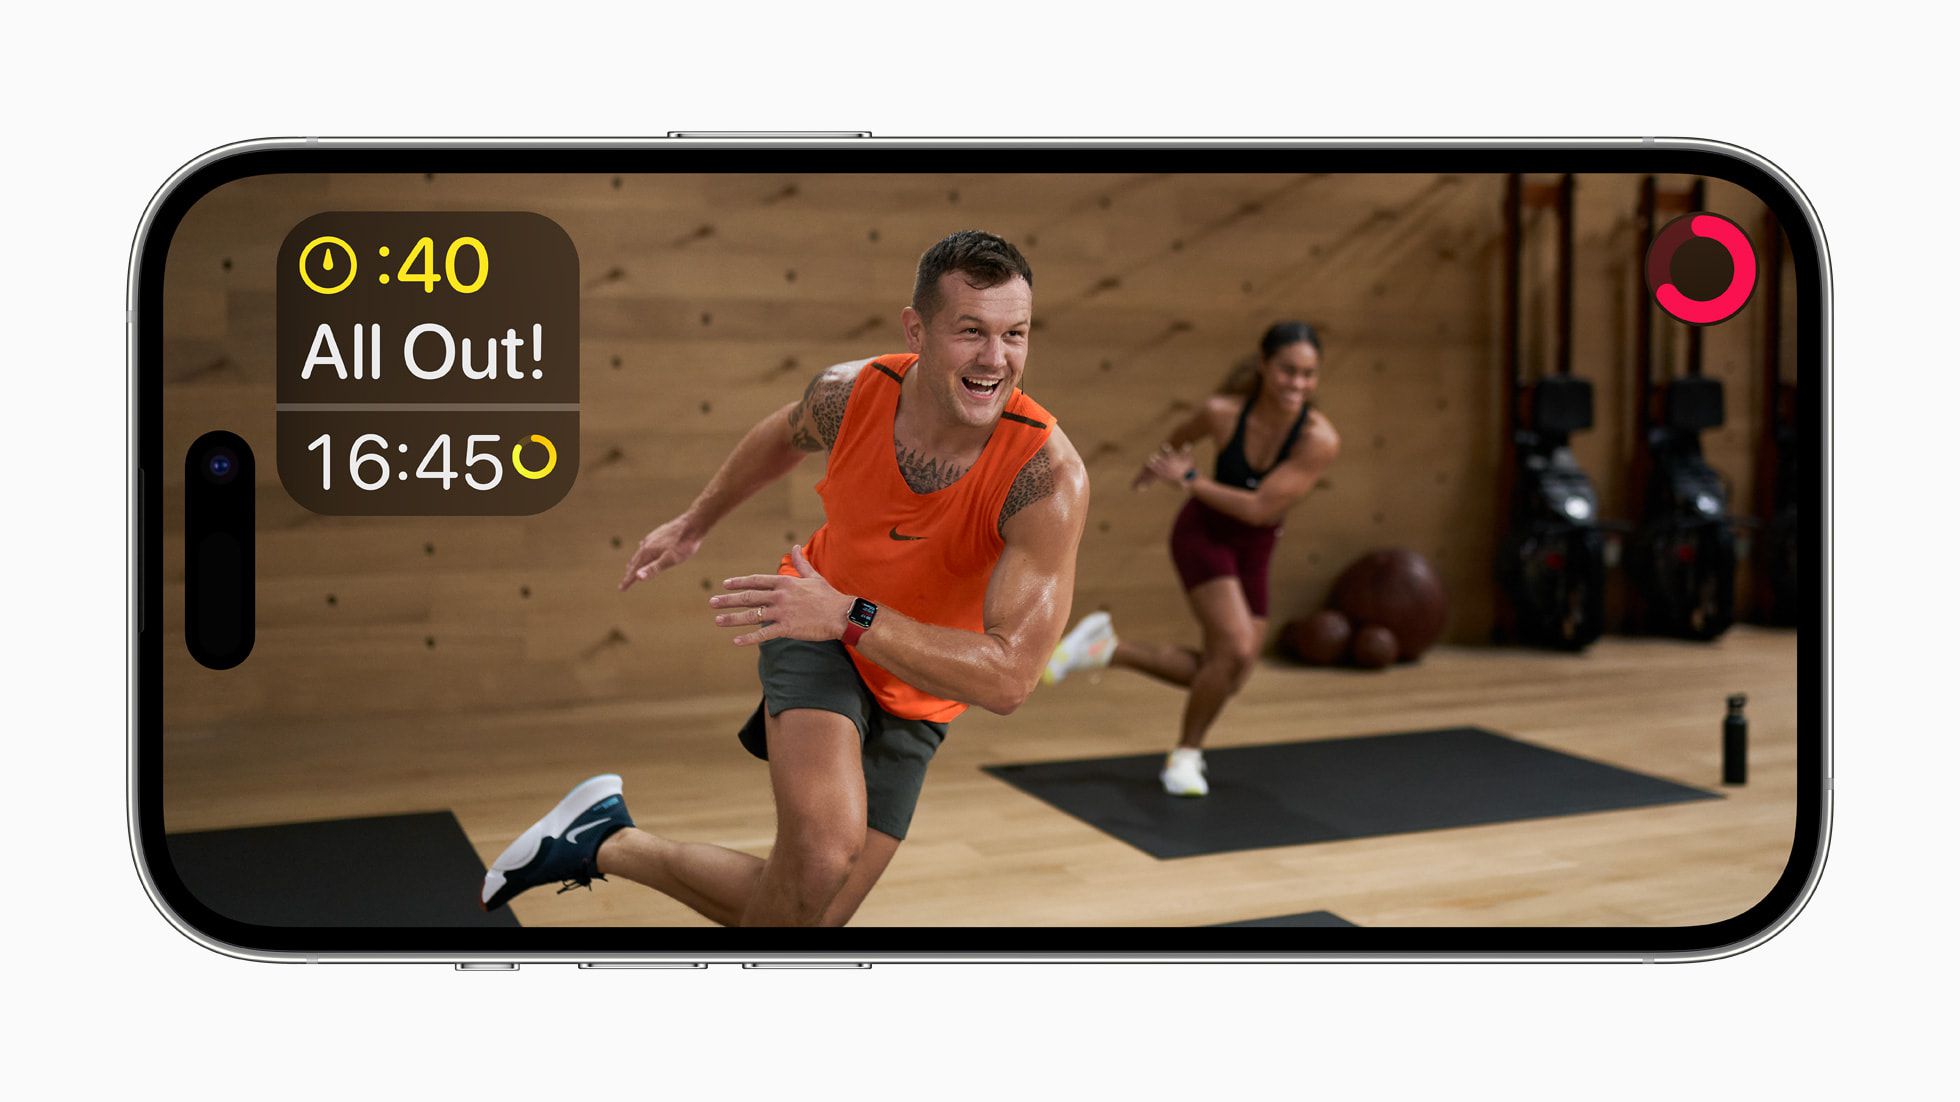 Apple Fitness+ Available Without Apple Watch Starting With iOS 16.1 and tvOS 16.1 - MacRumors